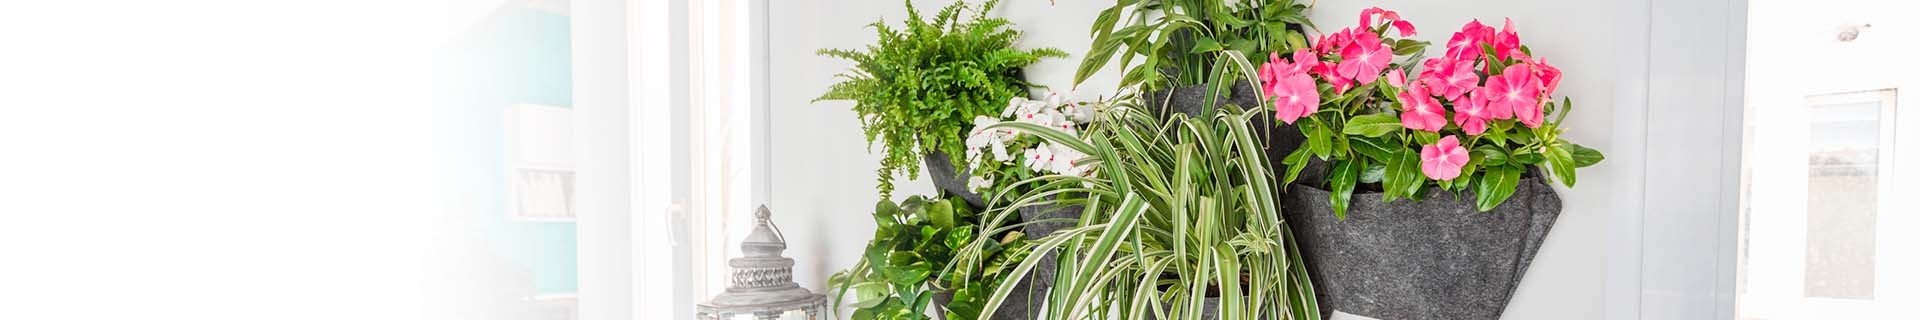 Wall Planter for Indoor or Outdoor Plants | CitySens